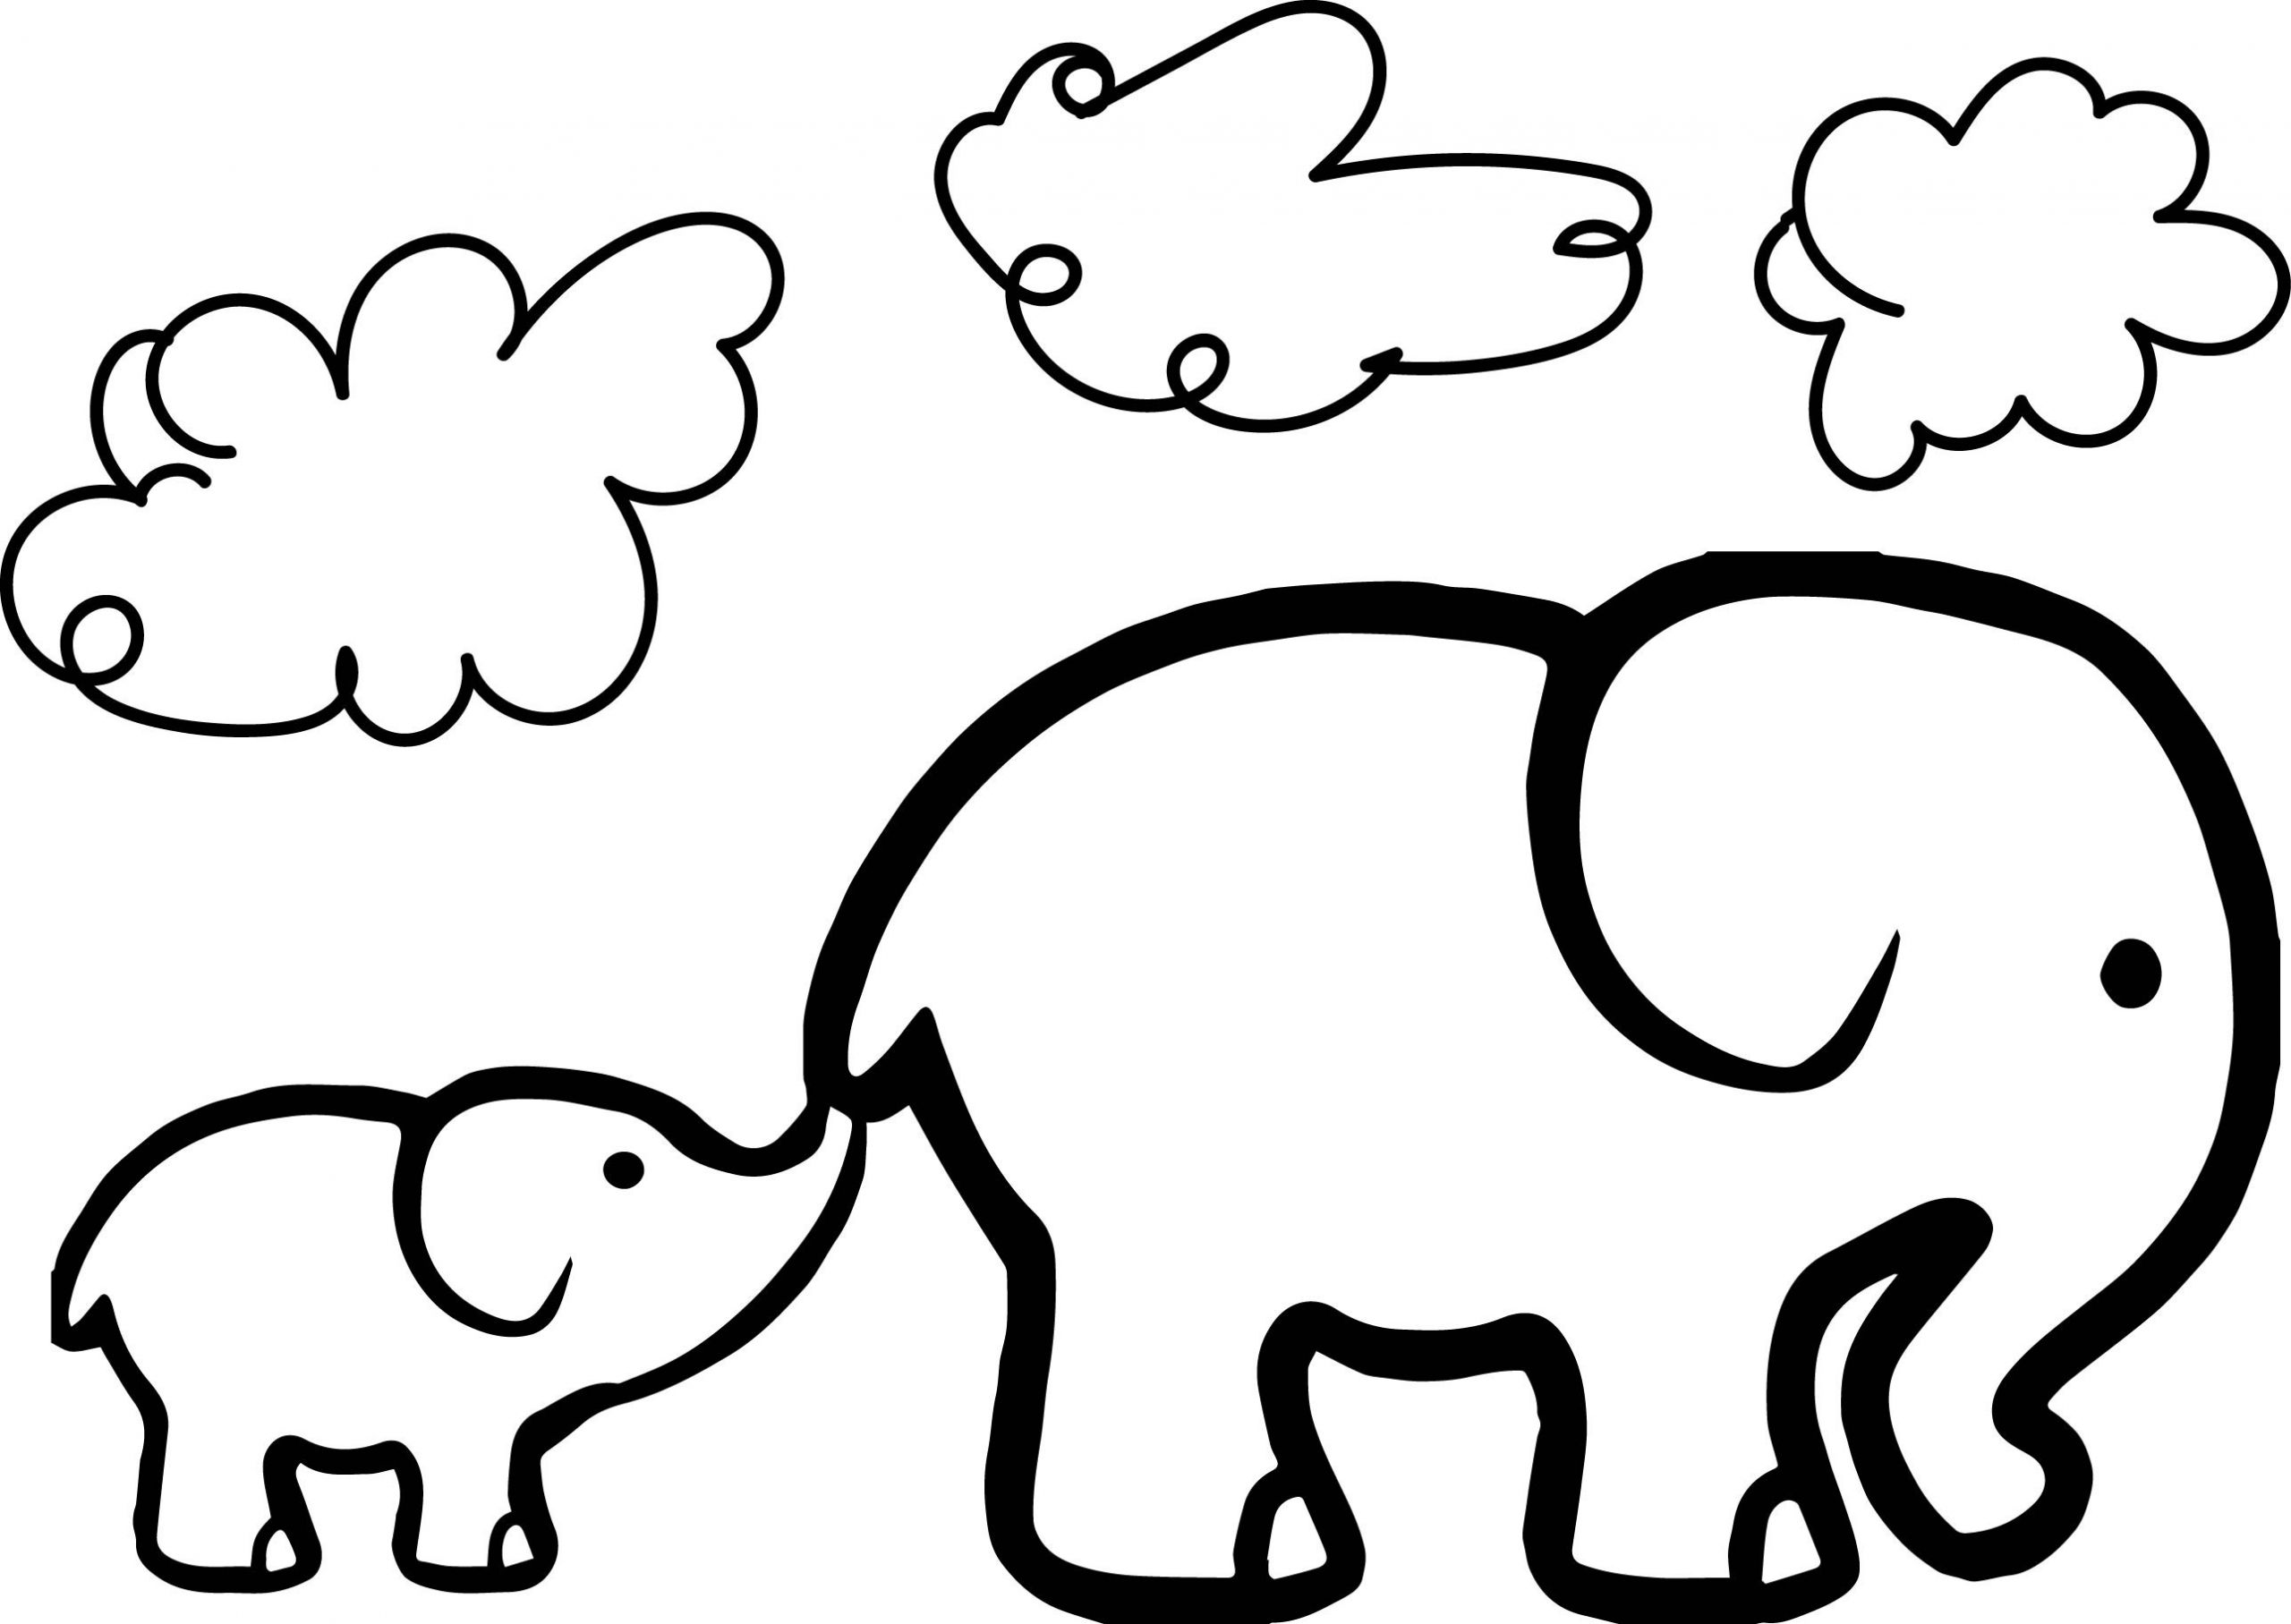 Baby Elephant Coloring Pages
 Elephant Coloring Pages